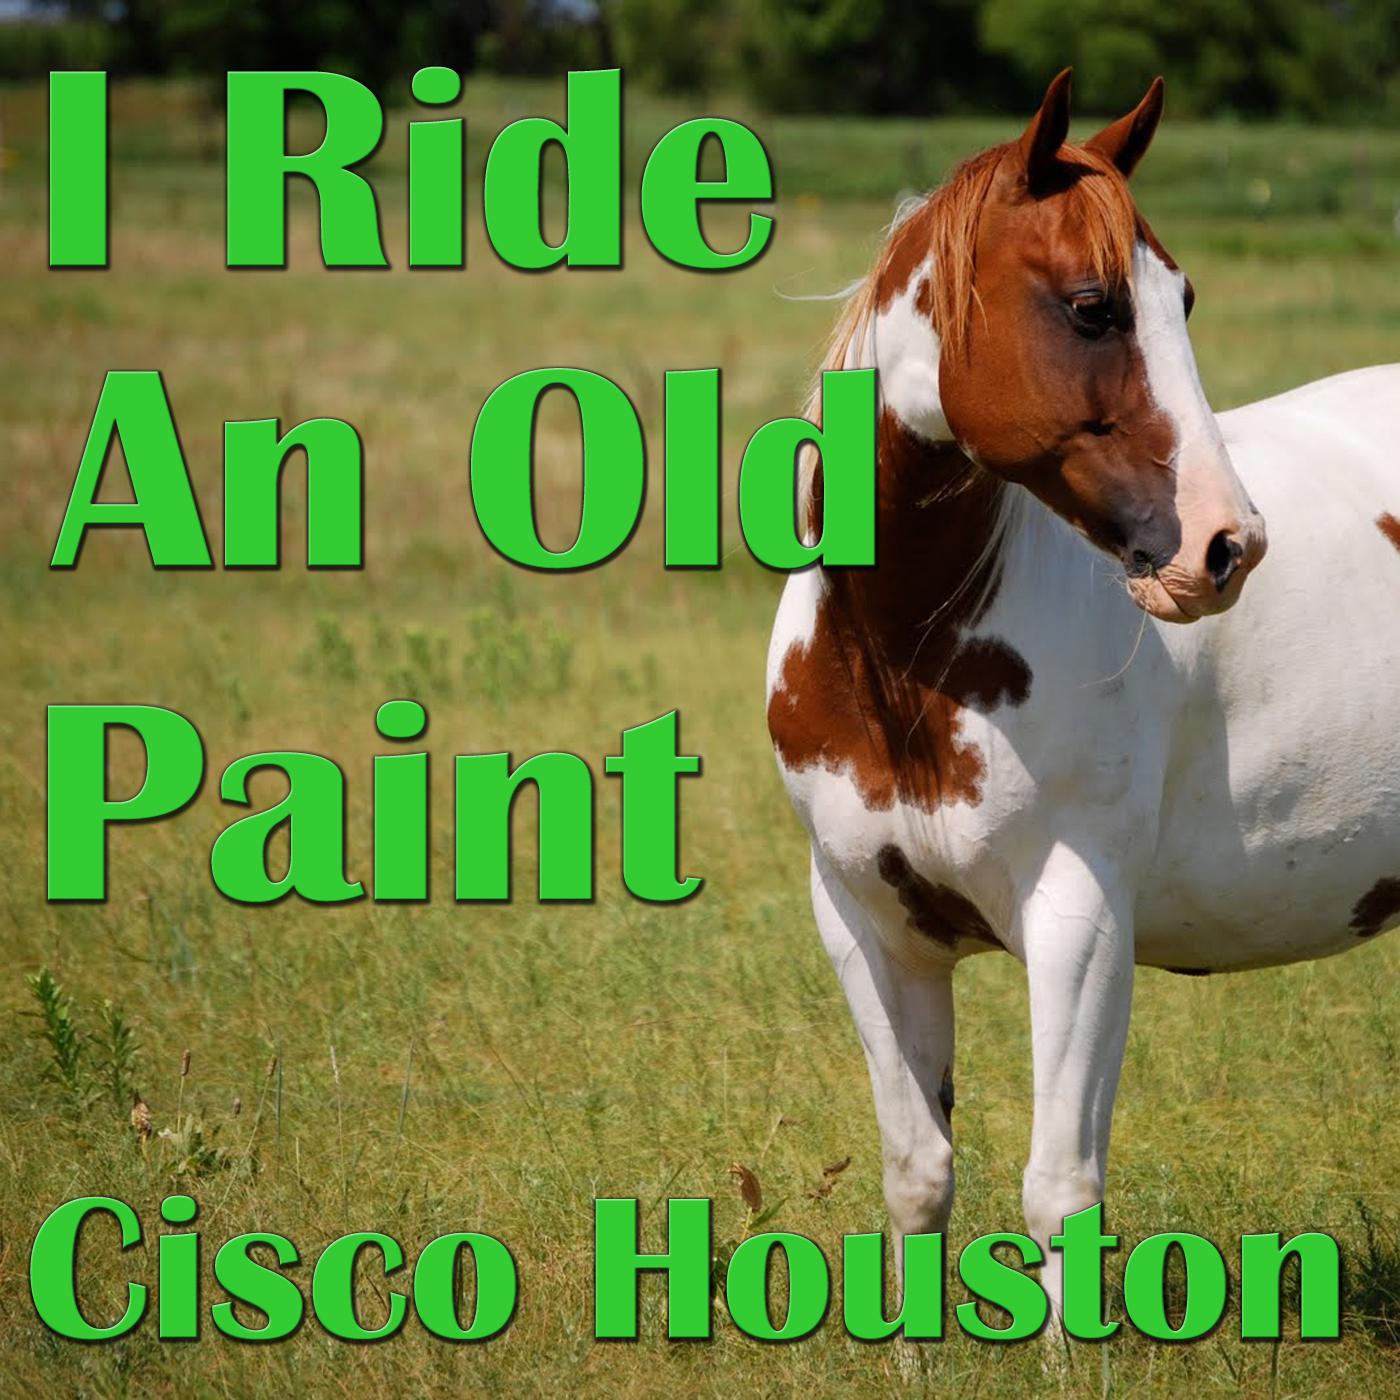 I Ride An Old Paint